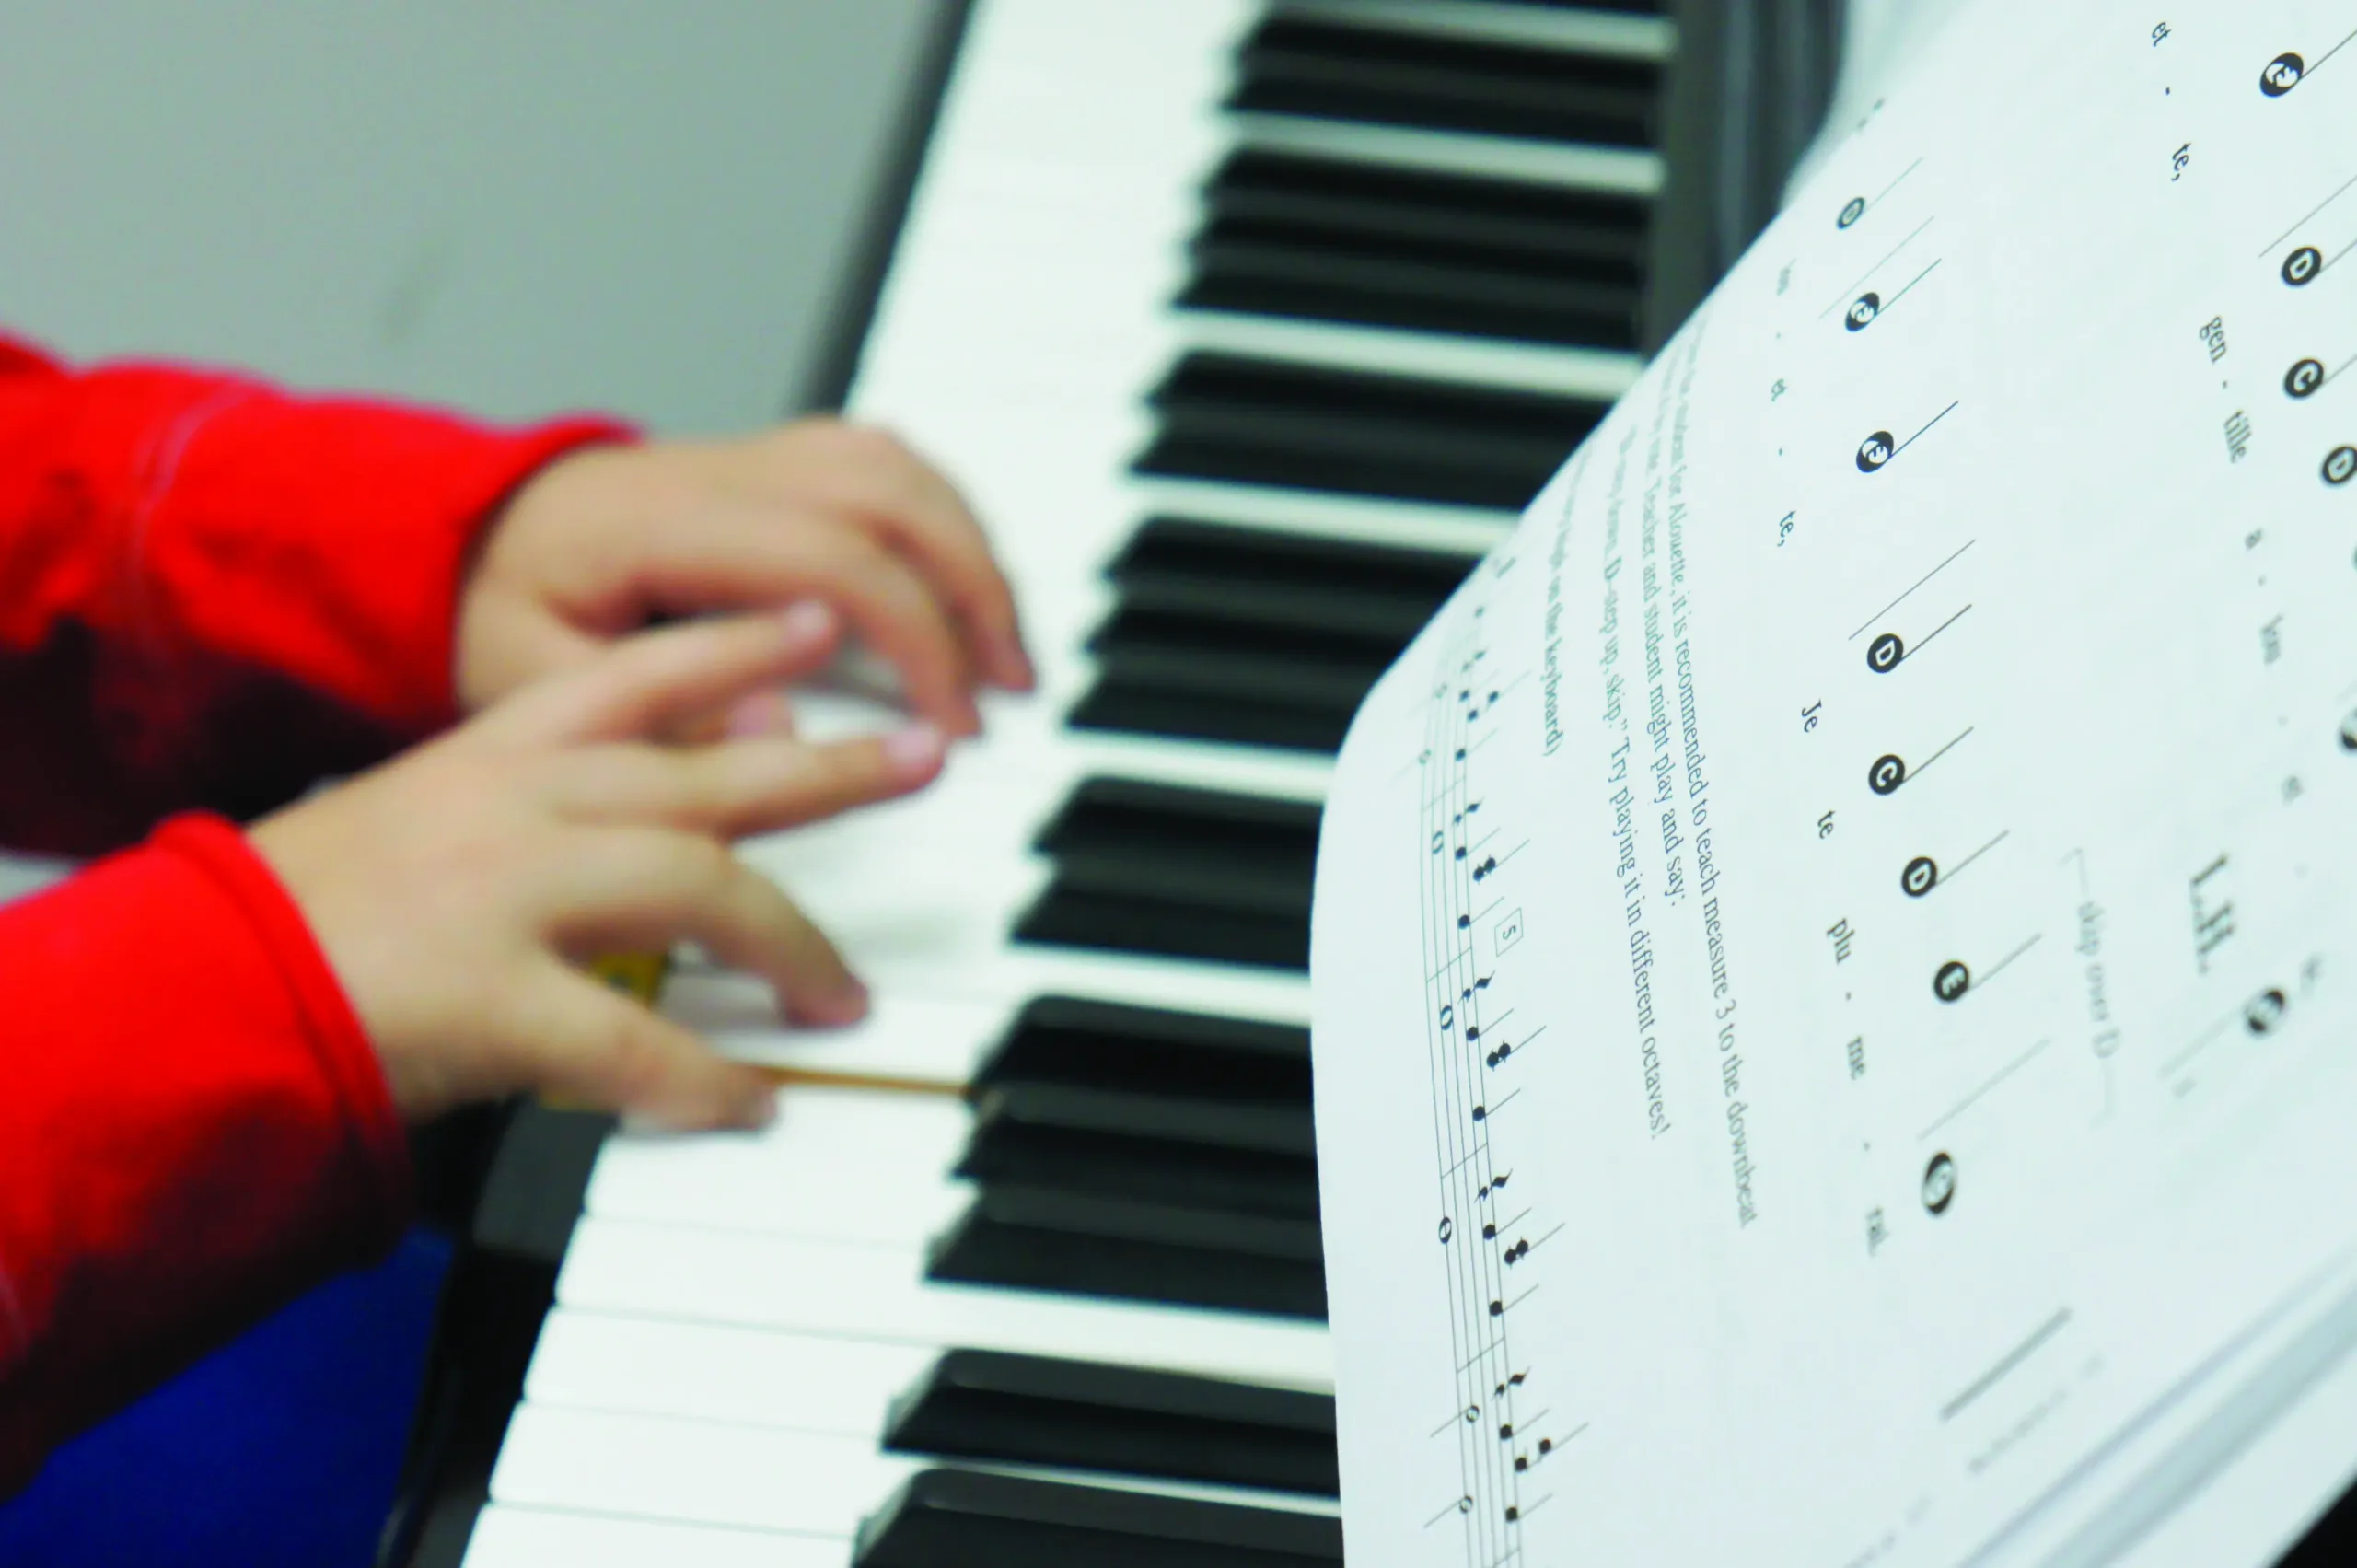 Music Beans in Lower Manhattan offers new music classes for kids.